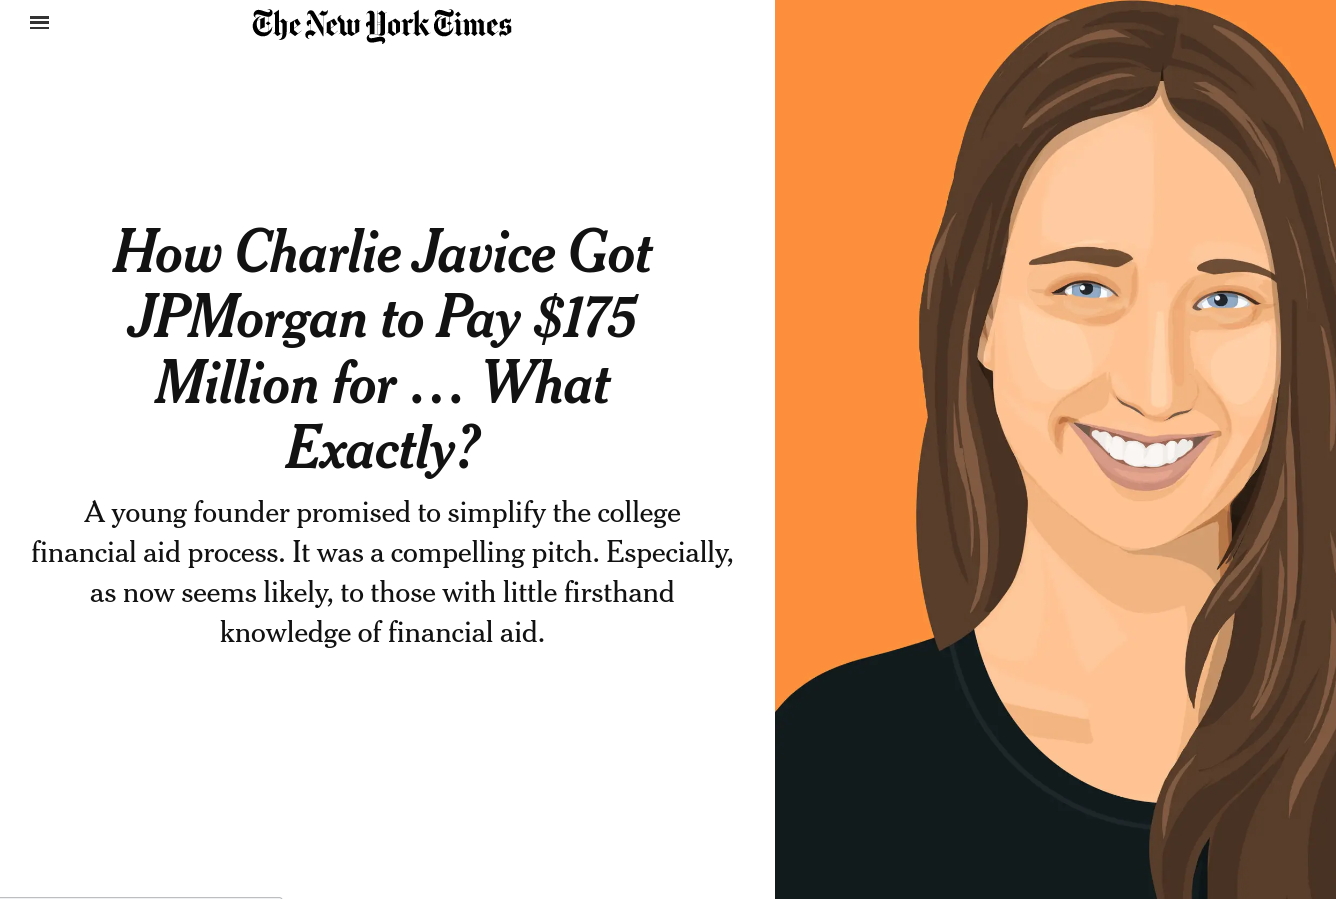 How Charlie Javice Got JPMorgan to Pay $175 Million for … What Exactly?